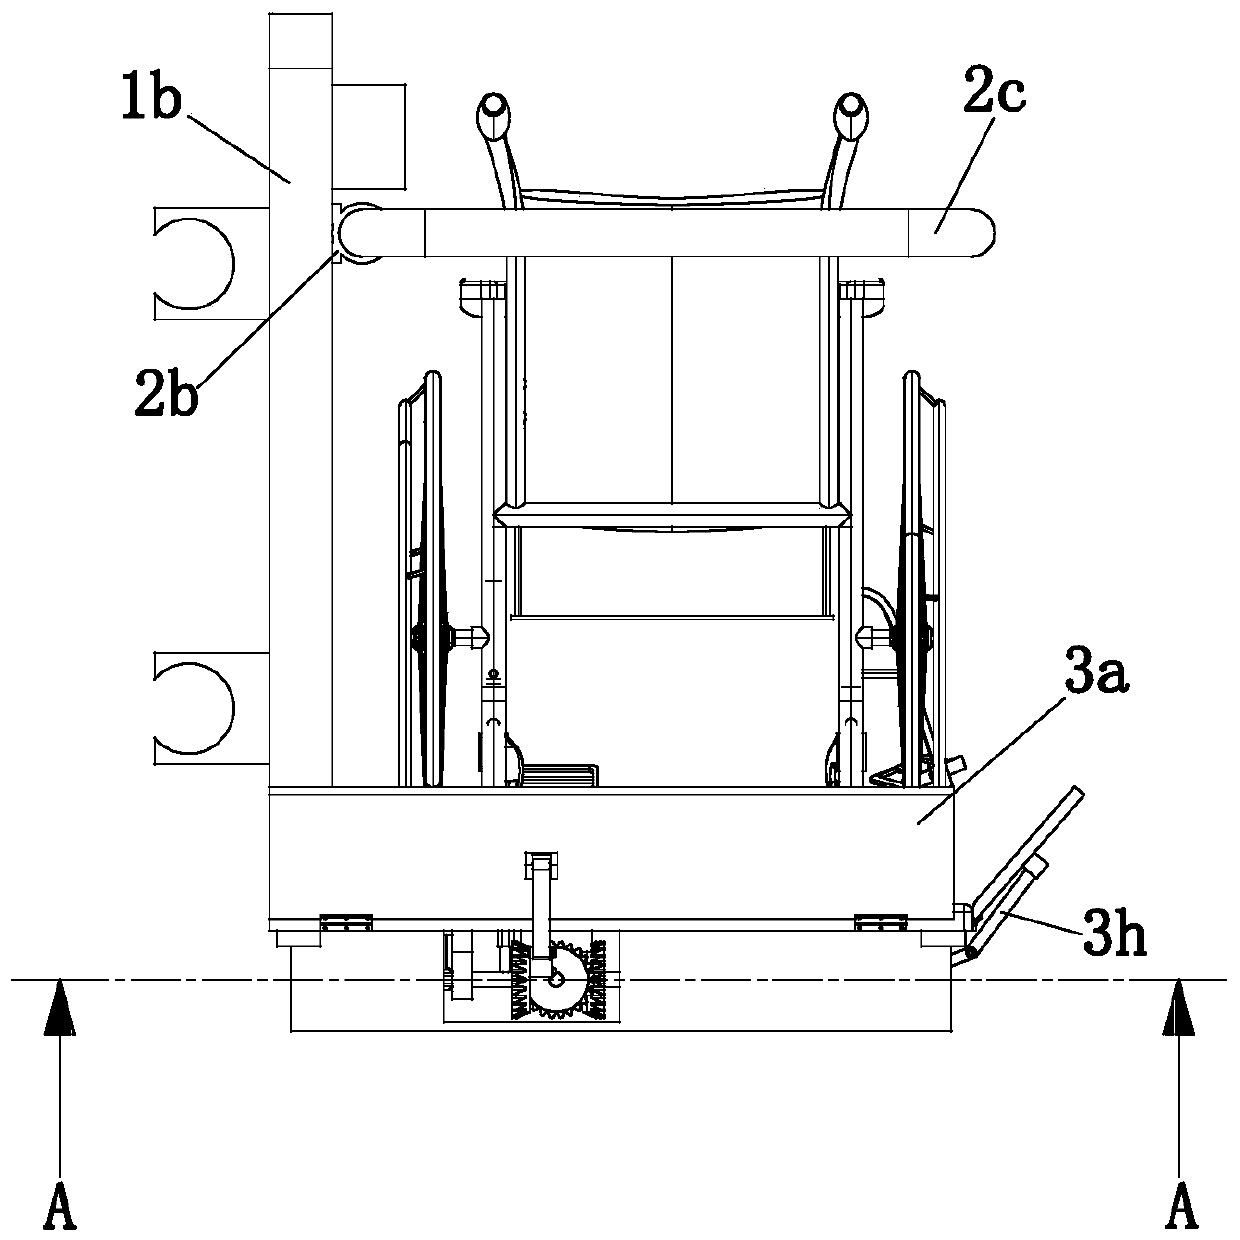 A disabled elevator capable of automatically opening platform pedals